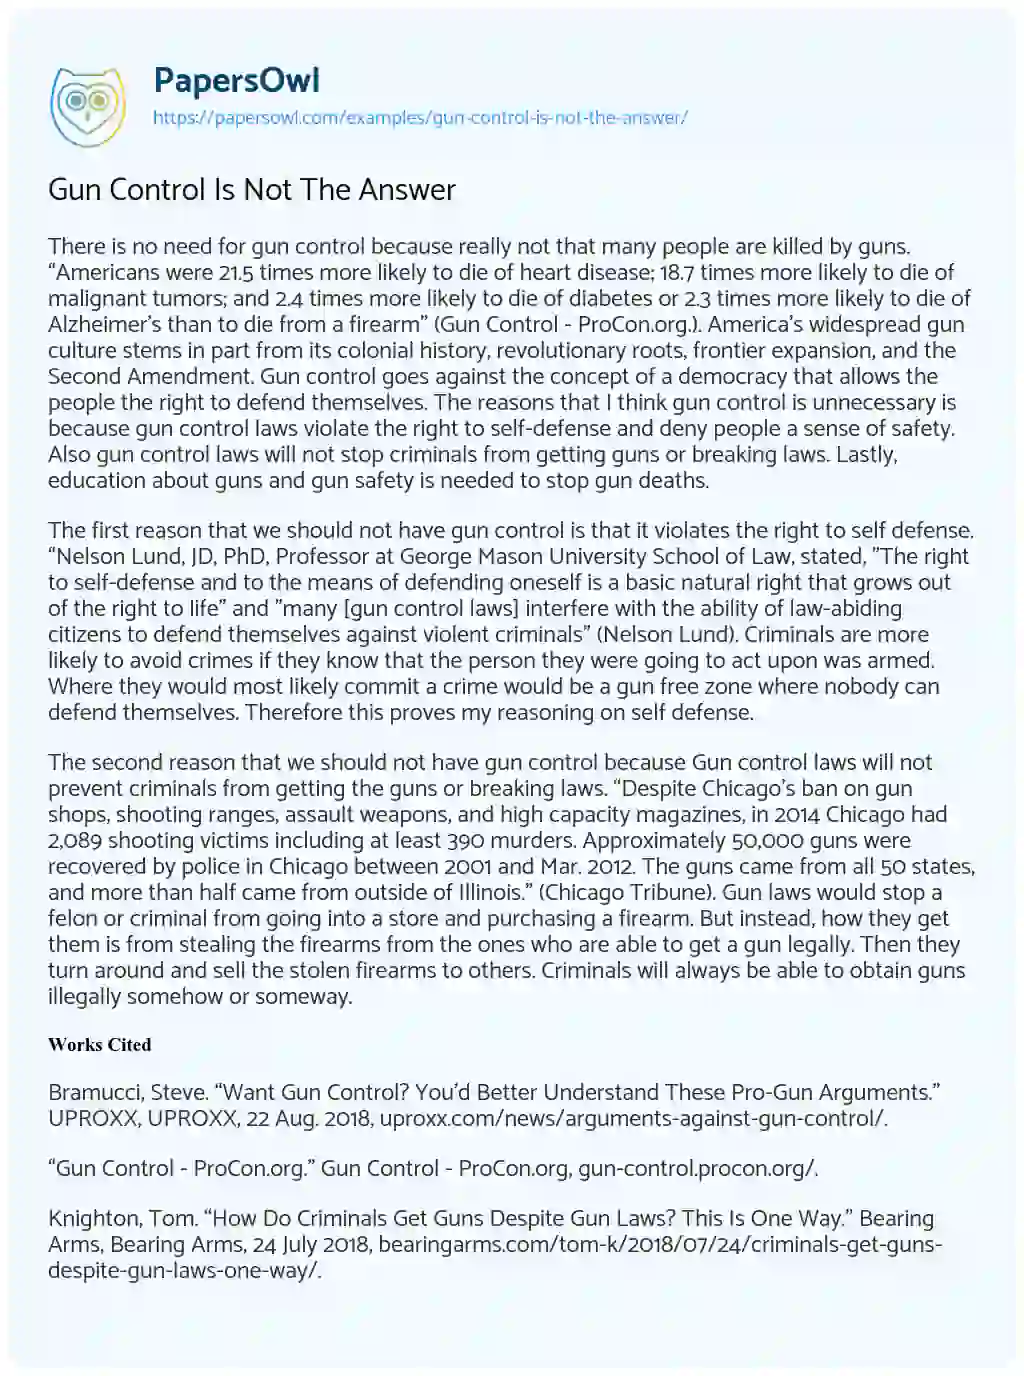 Gun Control is not the Answer essay